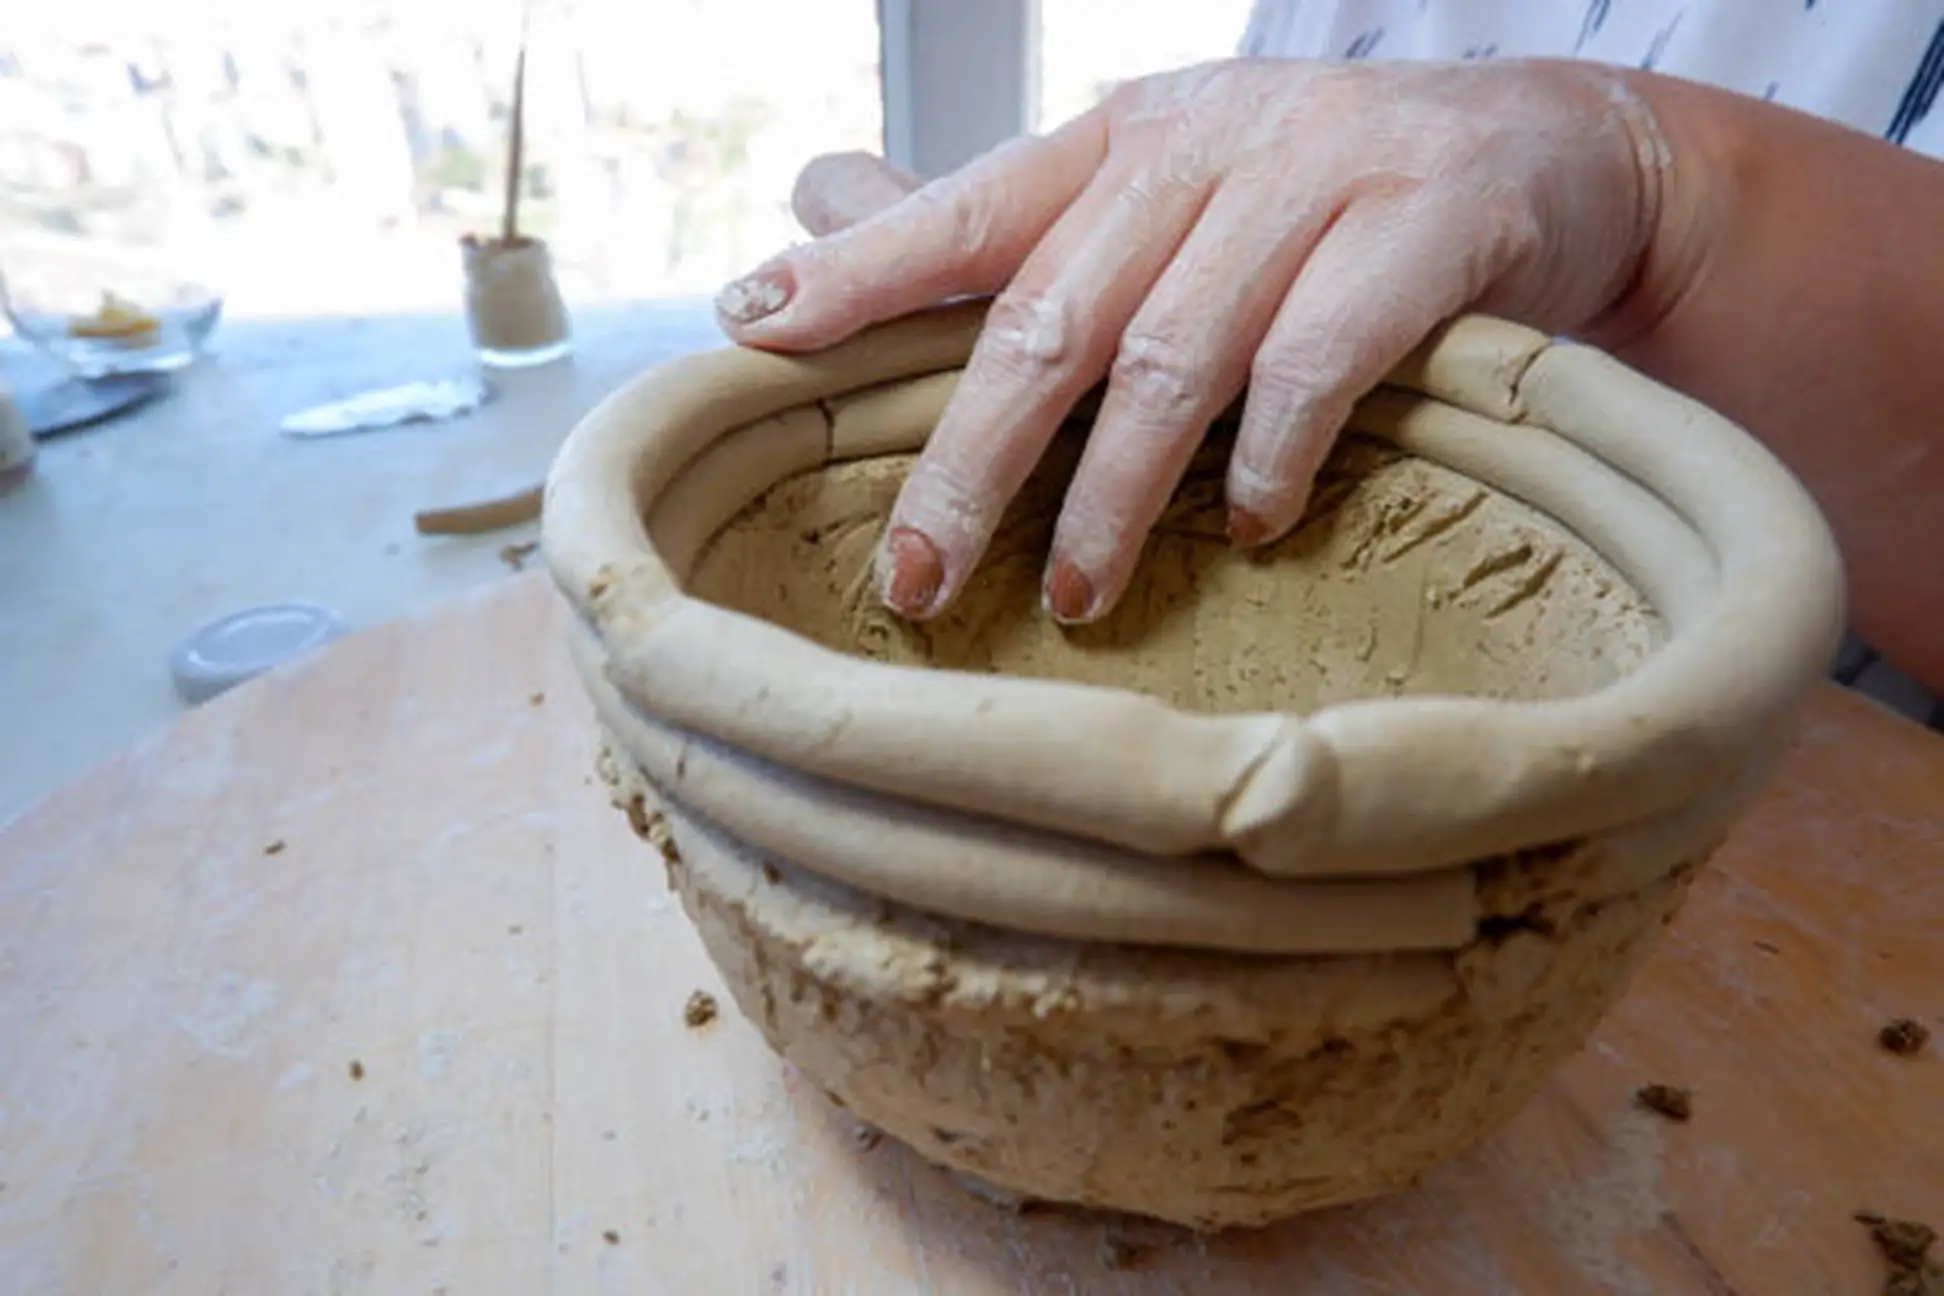 Unraveling Coil Pottery: A Comprehensive Guide for Aspiring Artistic Potters